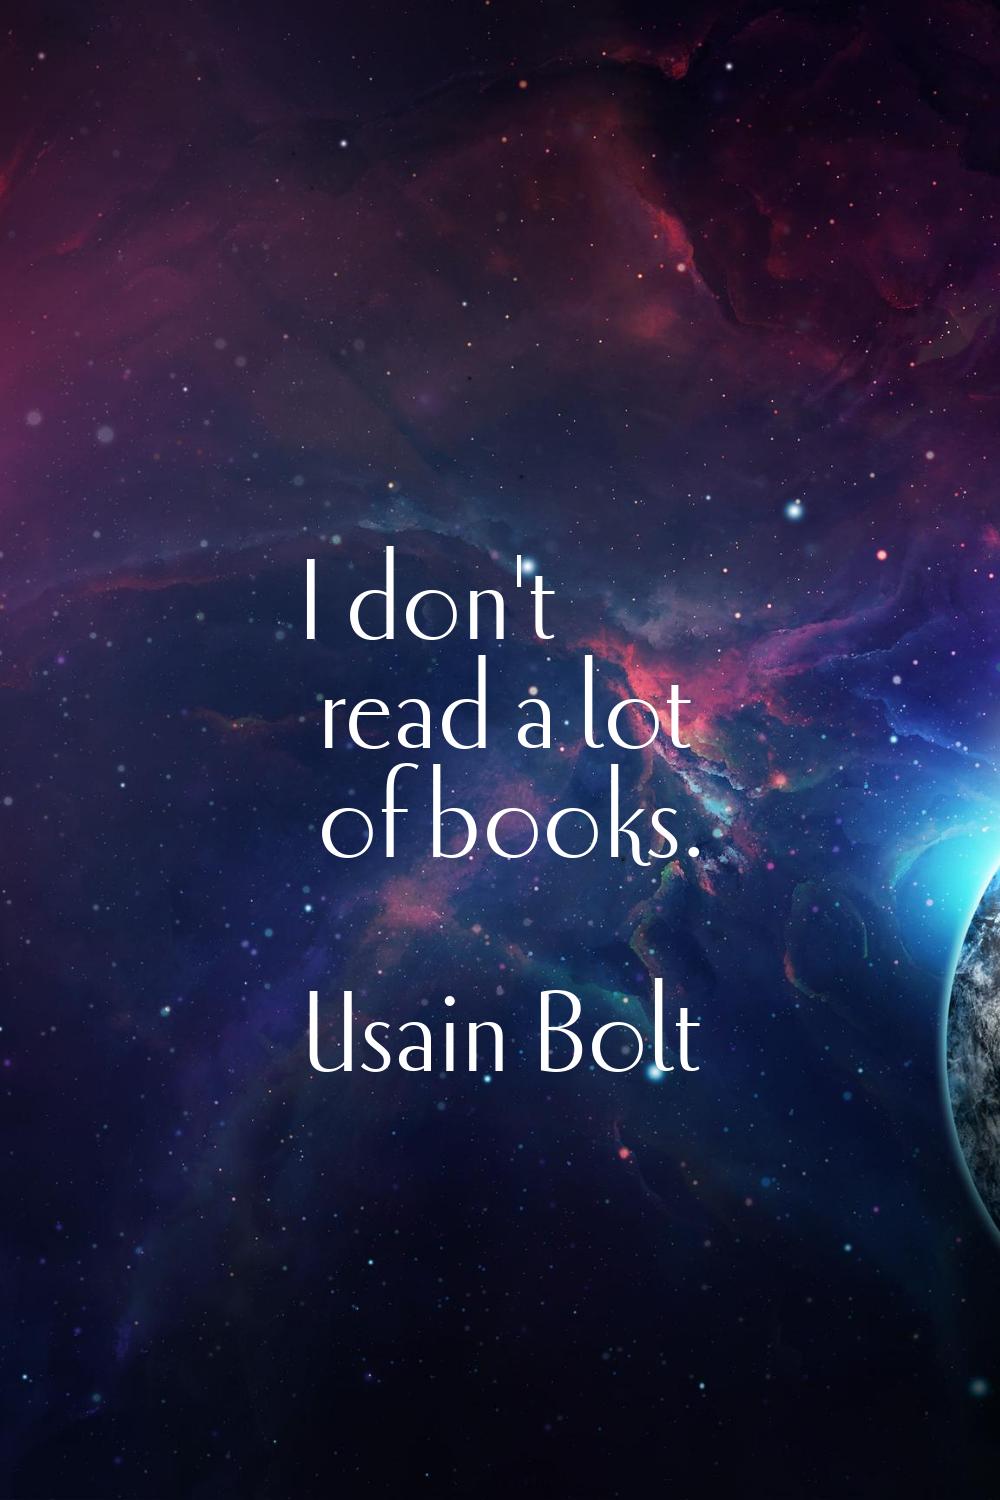 I don't read a lot of books.